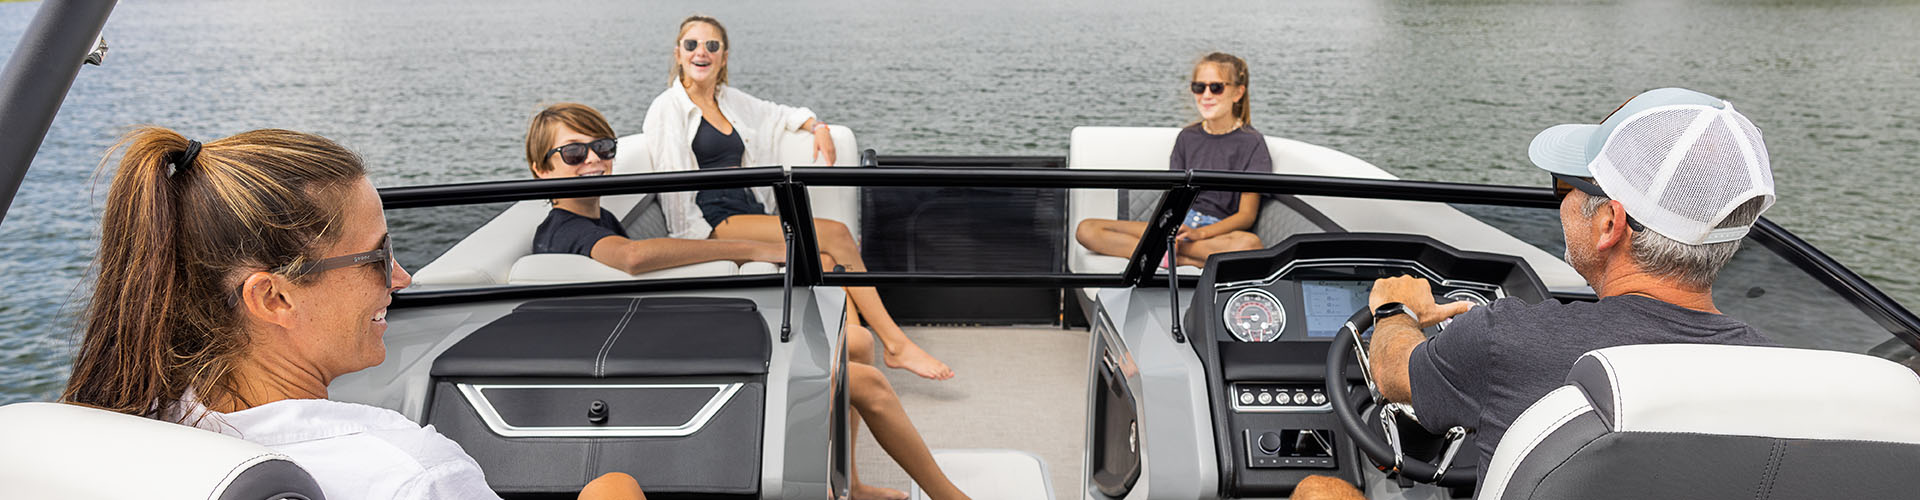 Care and Cleaning Guide For a Pontoon Boat